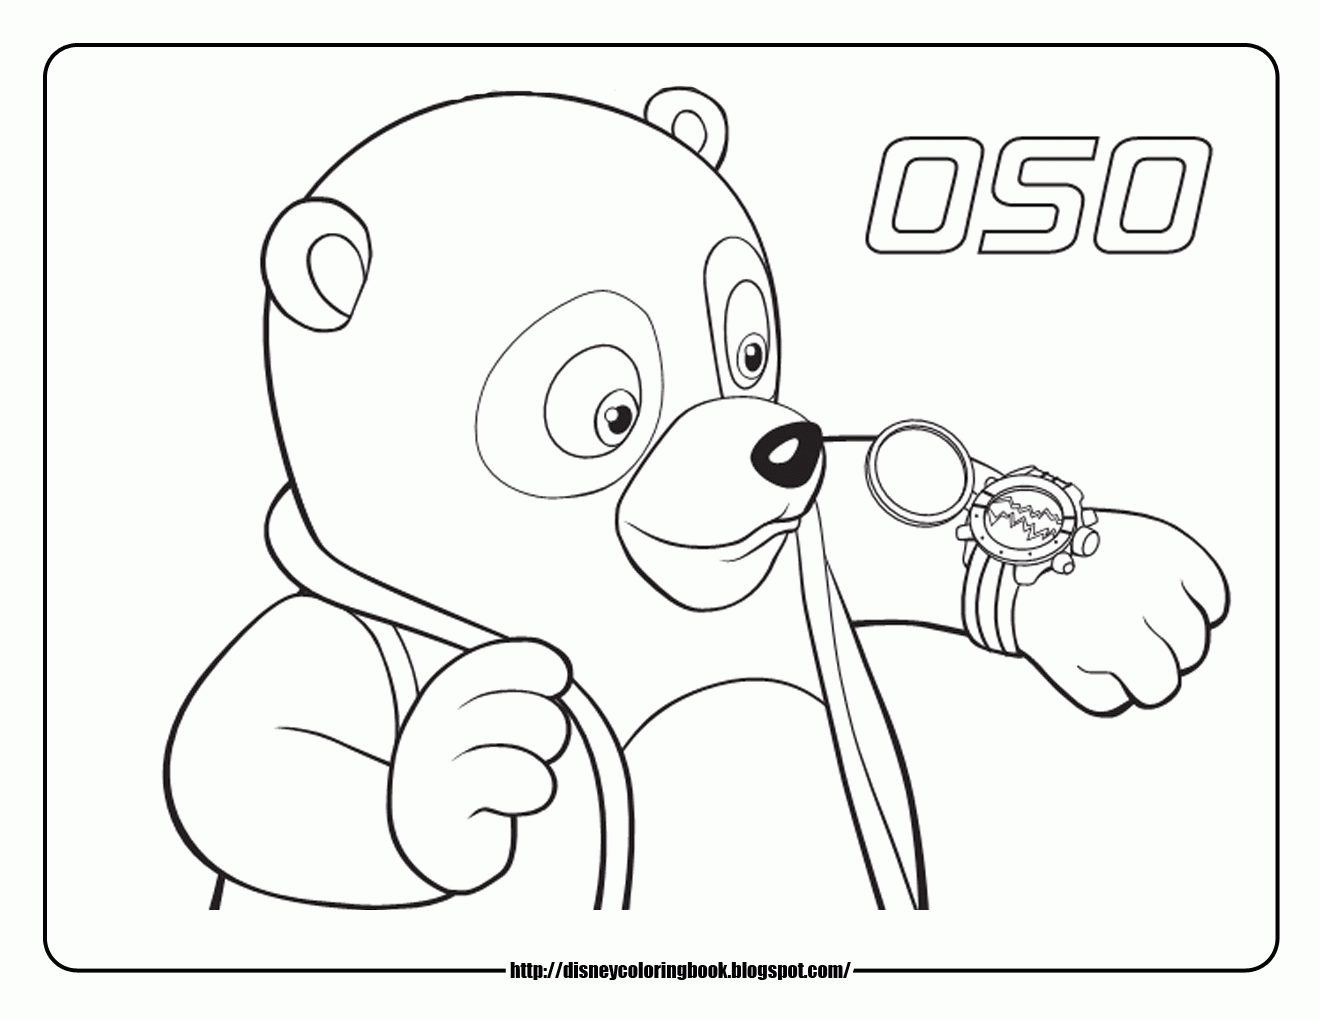 Download Coloring Pages Disney Jr - Coloring Home